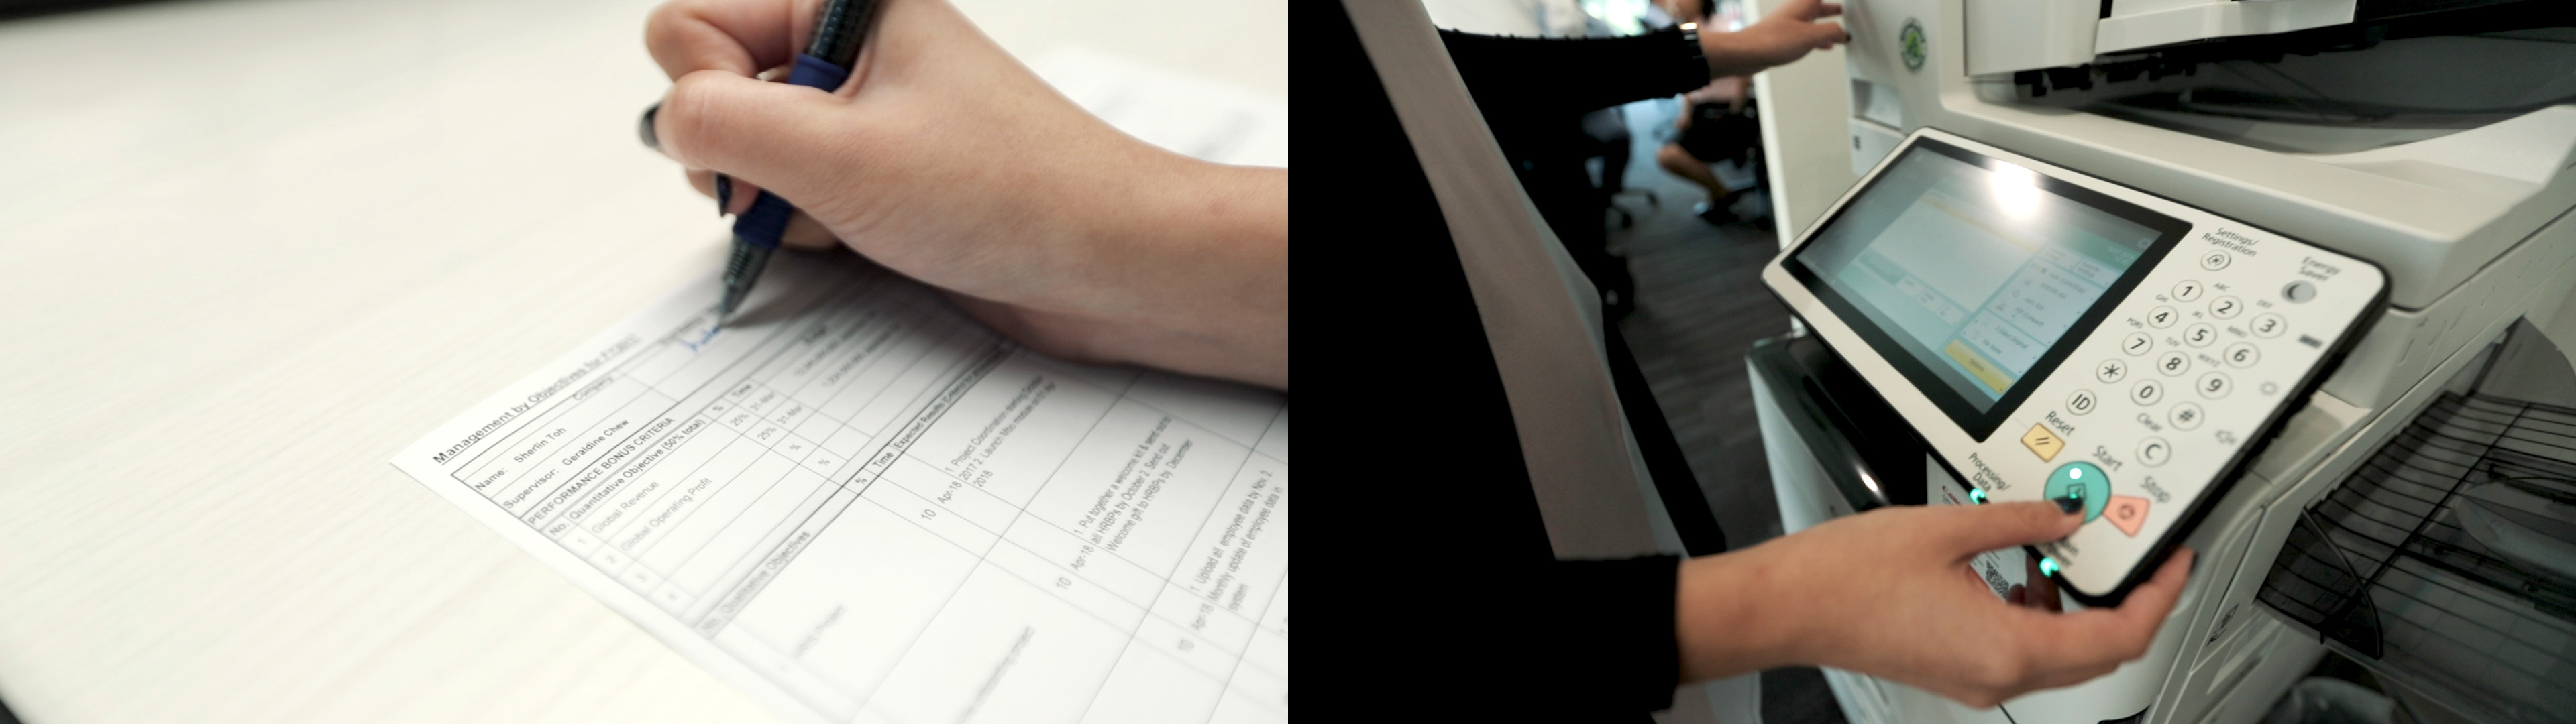 Left, woman’s hand writing on form, right, woman’s hand pressing copy button on copier